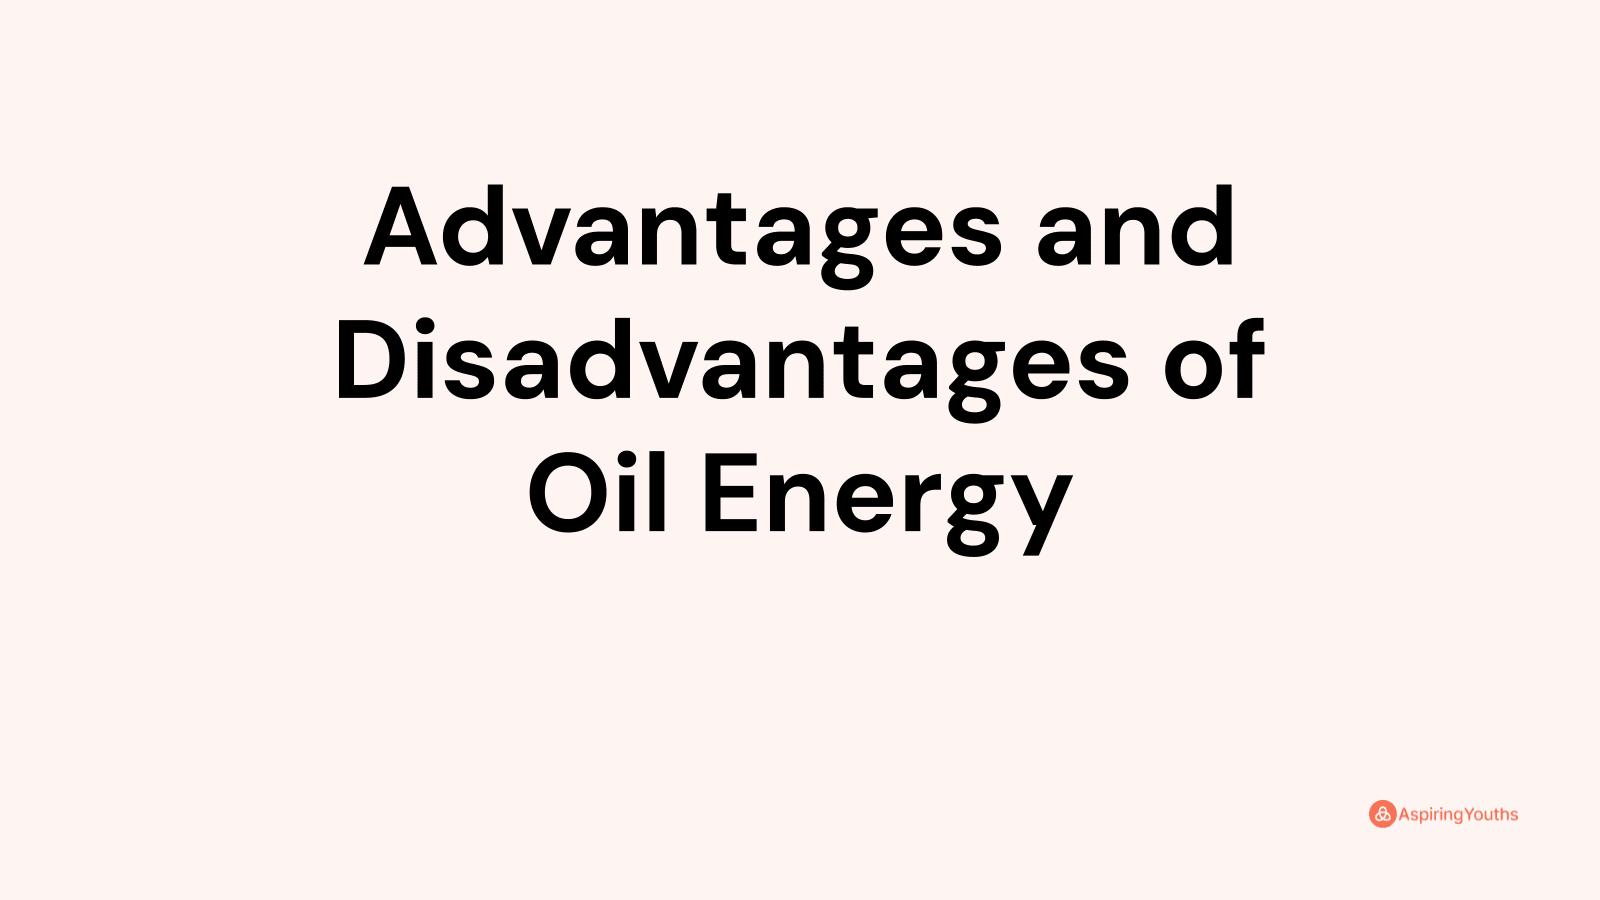 Advantages and disadvantages of Oil Energy